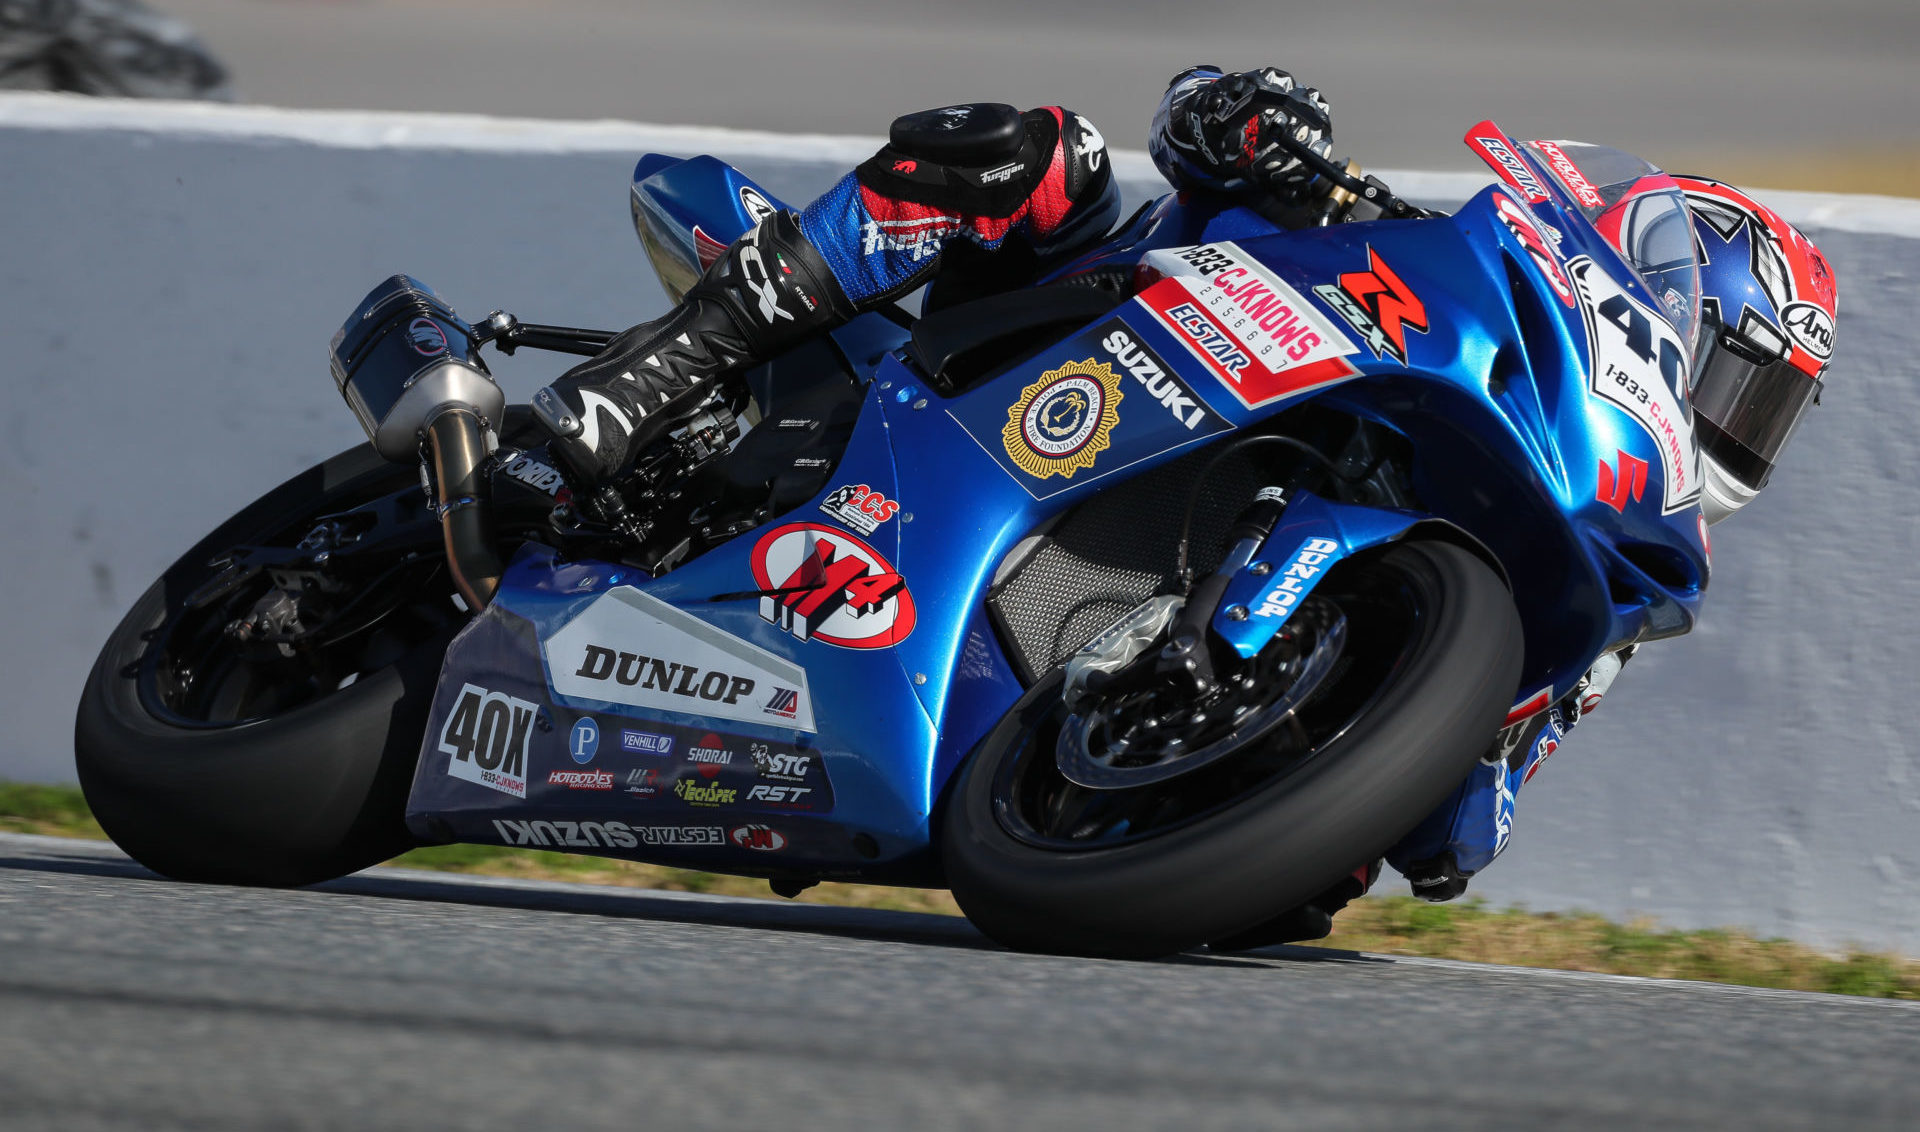 Sean Dylan Kelly (40X), as seen during the first Daytona 200 qualifying session Friday morning at Daytona International Speedway. Photo by Brian J. Nelson.